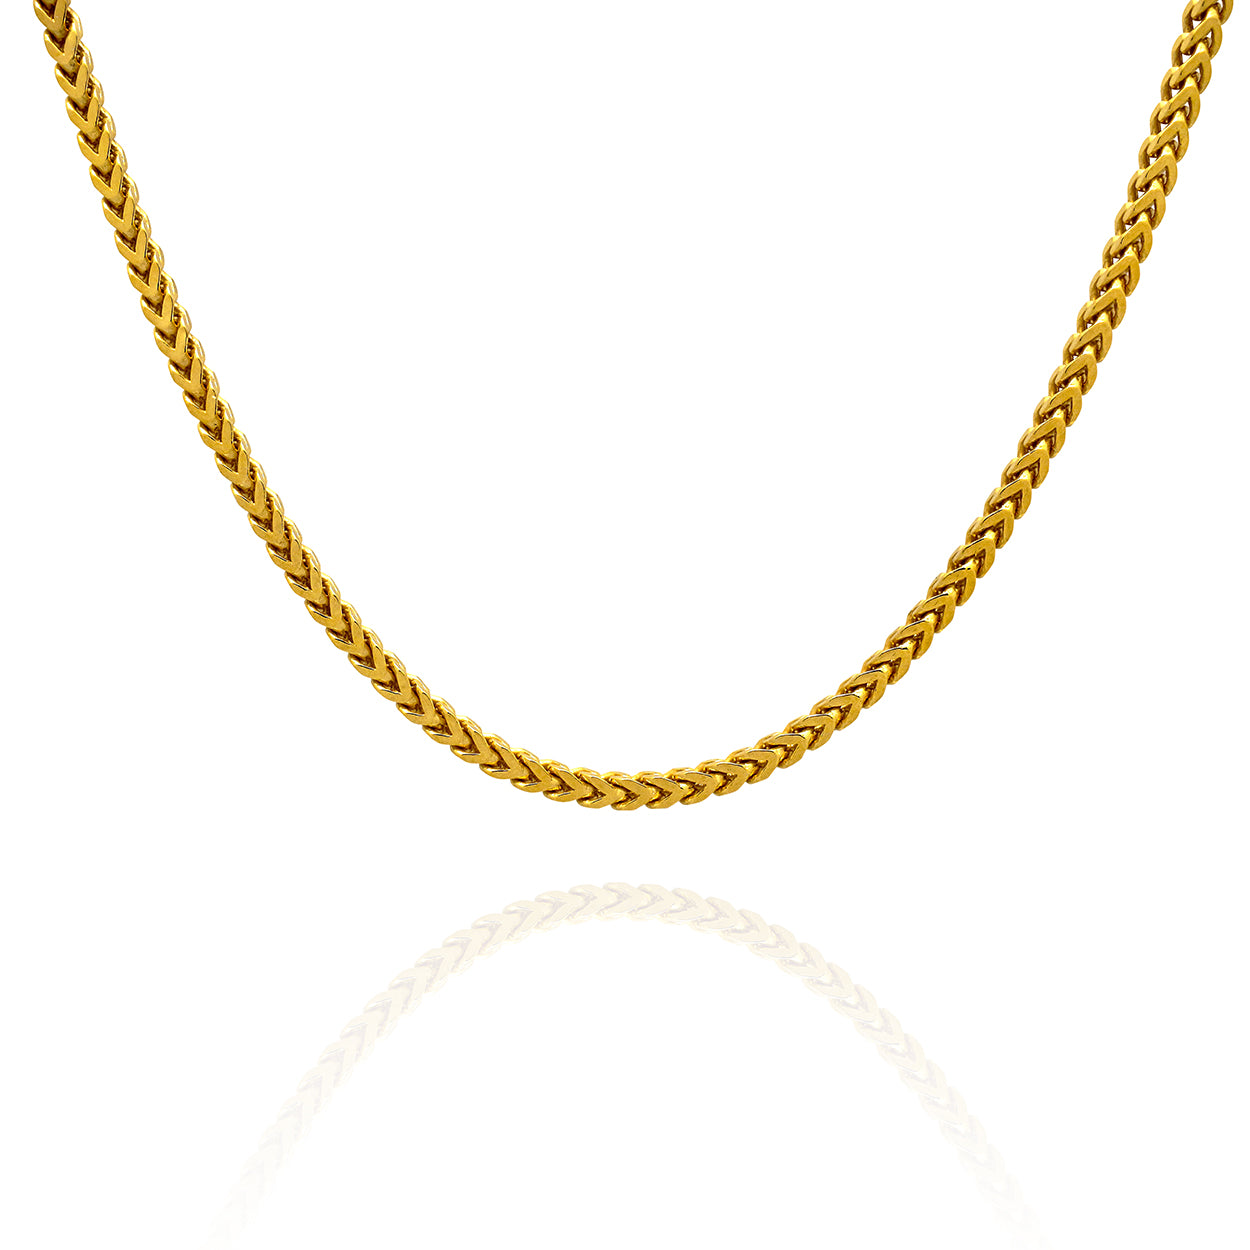 Sterling Silver Franco Style Chain plated in 18KT Yellow Gold